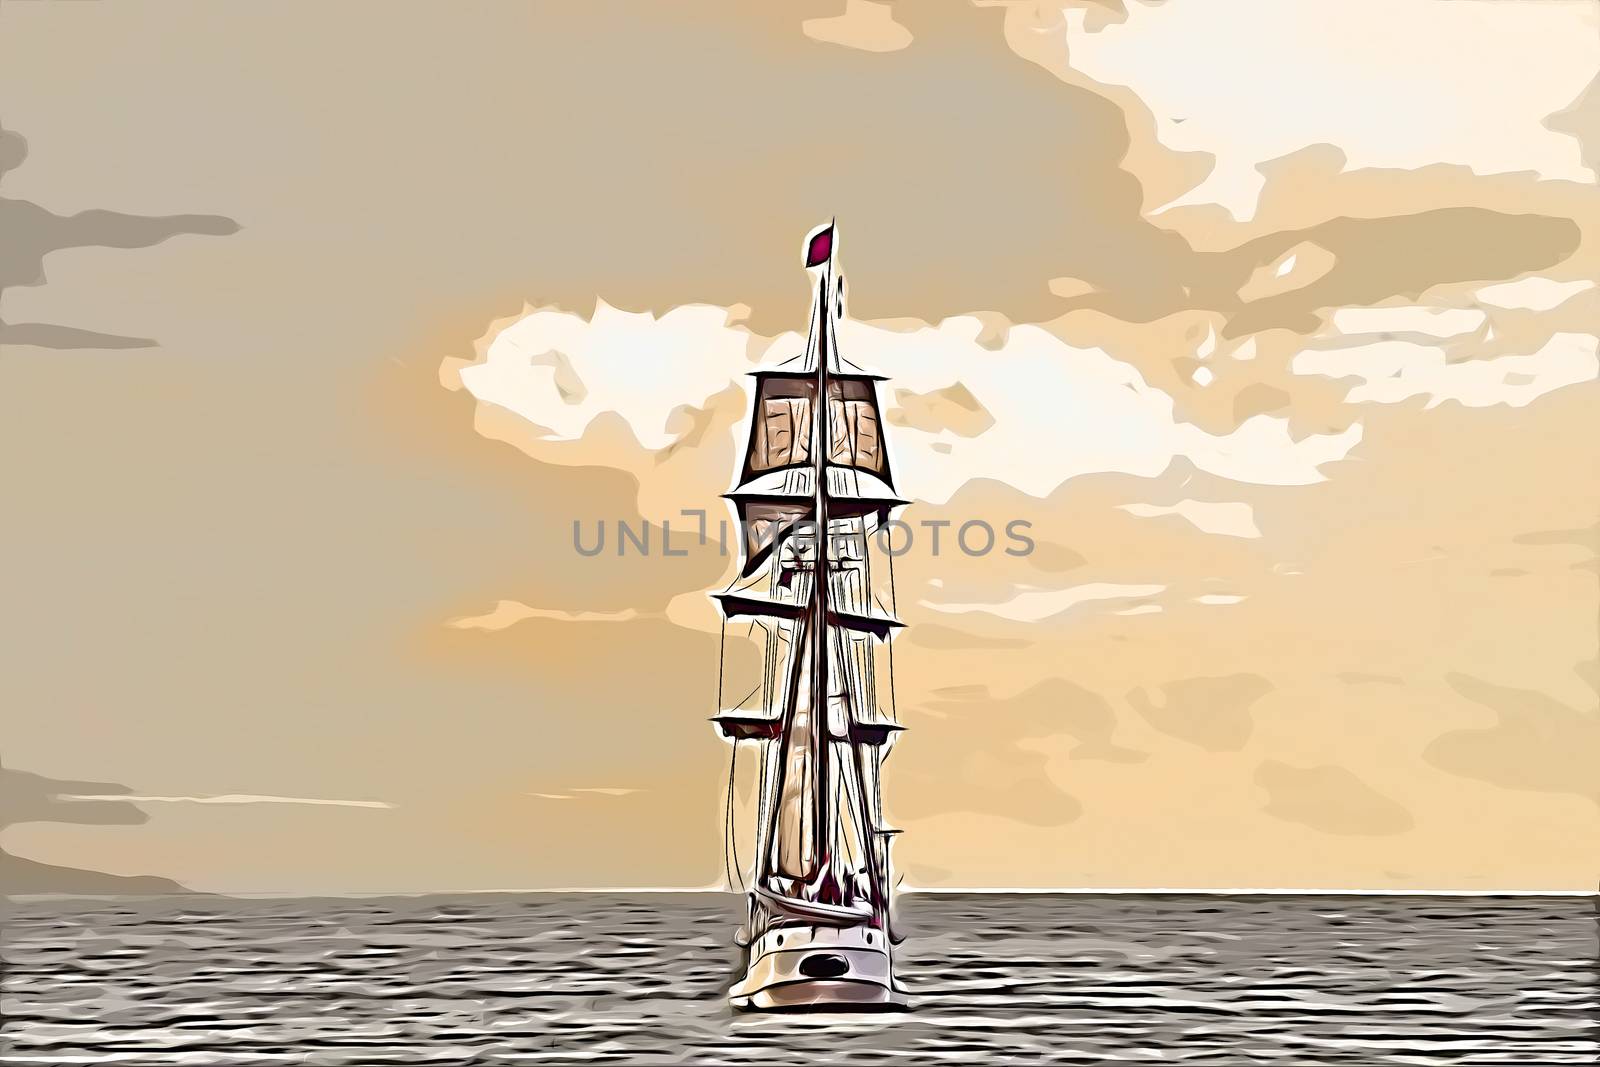 Antique tall ship, vessel leaving the harbor of The Hague, Scheveningen under a early warm sunset sky by ankorlight